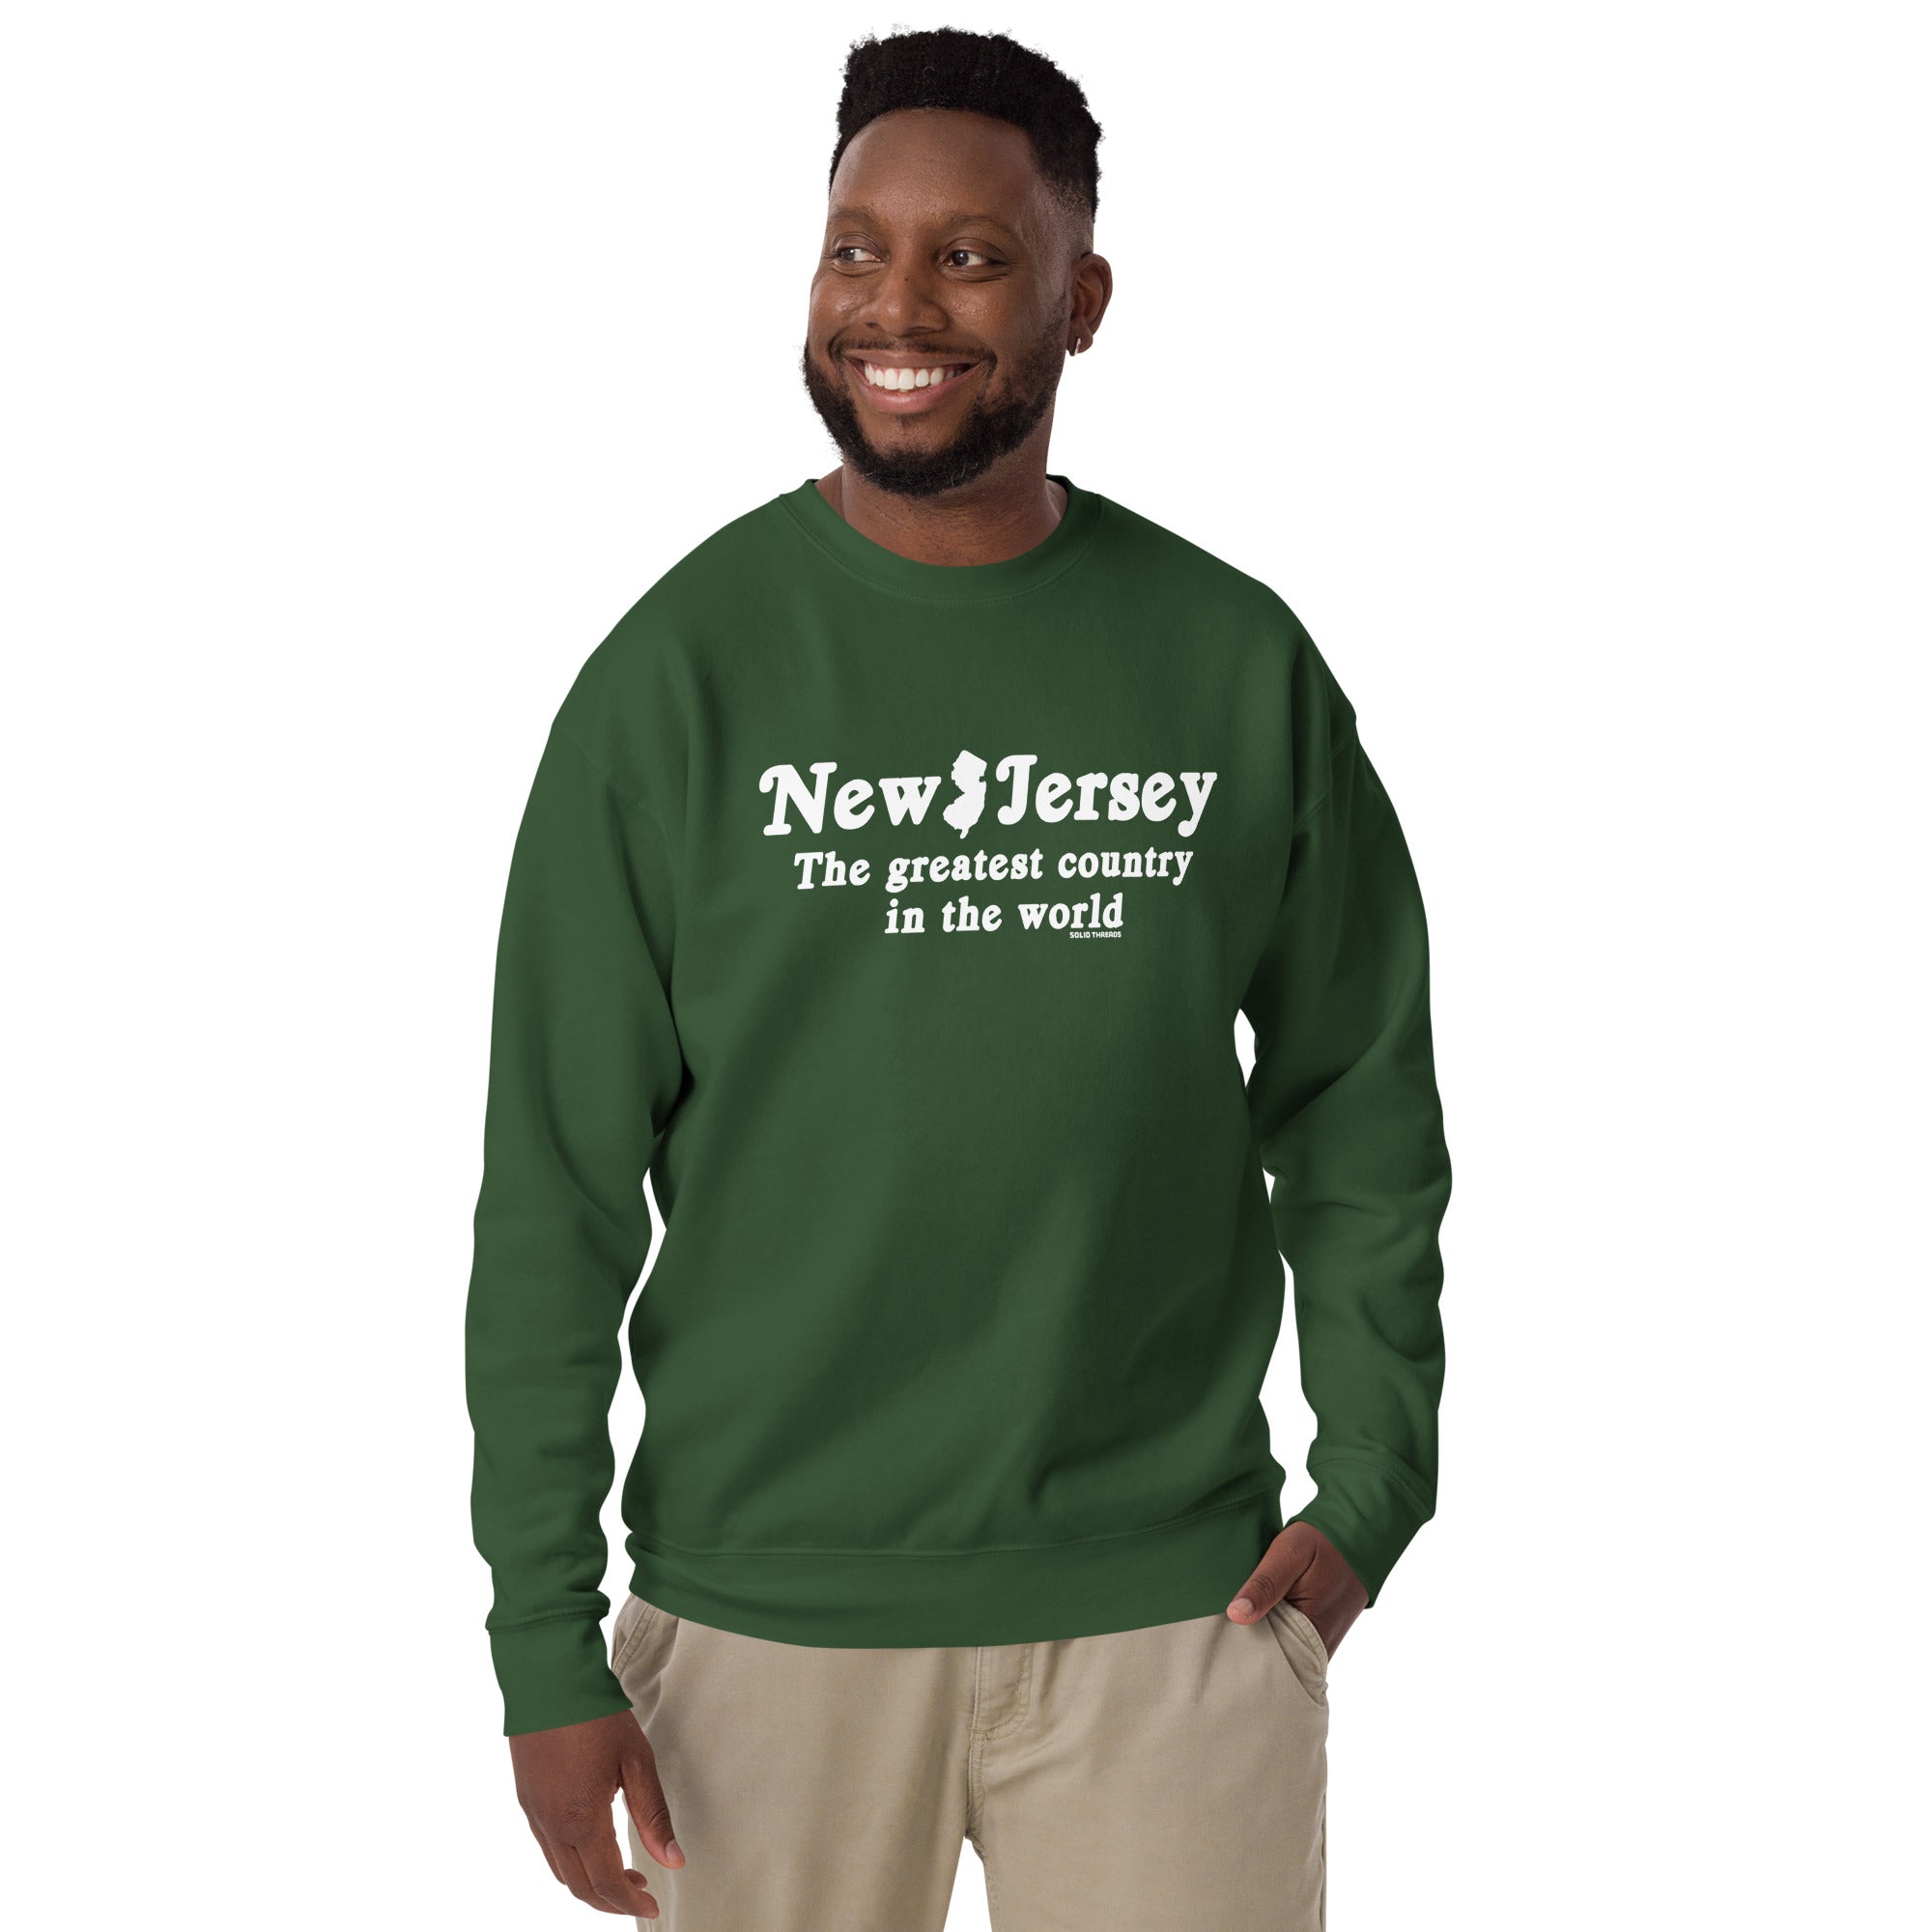 New Jersey The Greatest Country In The World Vintage Classic Sweatshirt | Funny Garden State Fleece | Solid Threads